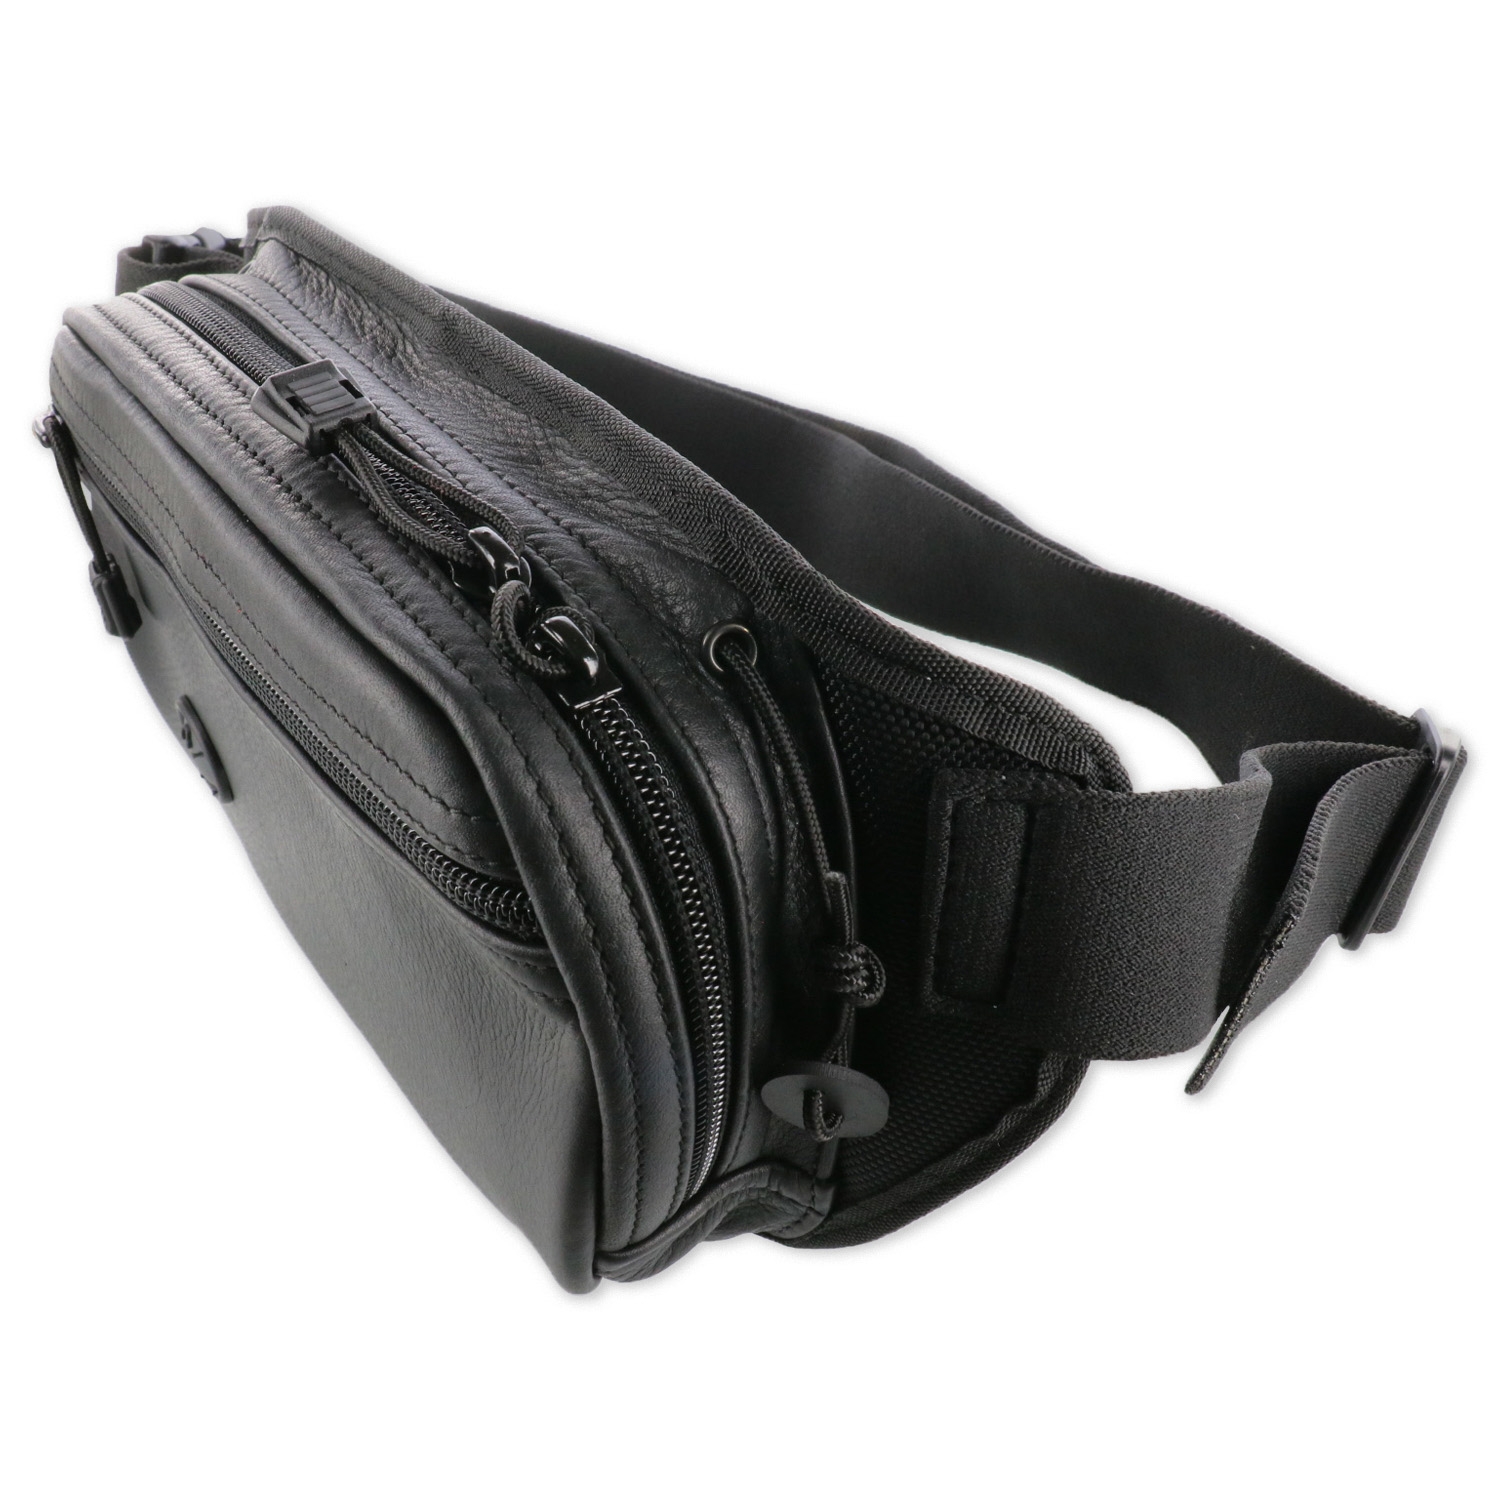 FASTRAX PAC ELITE WAISTPACK (COMPACT): Specialty Holsters | Galco Holsters